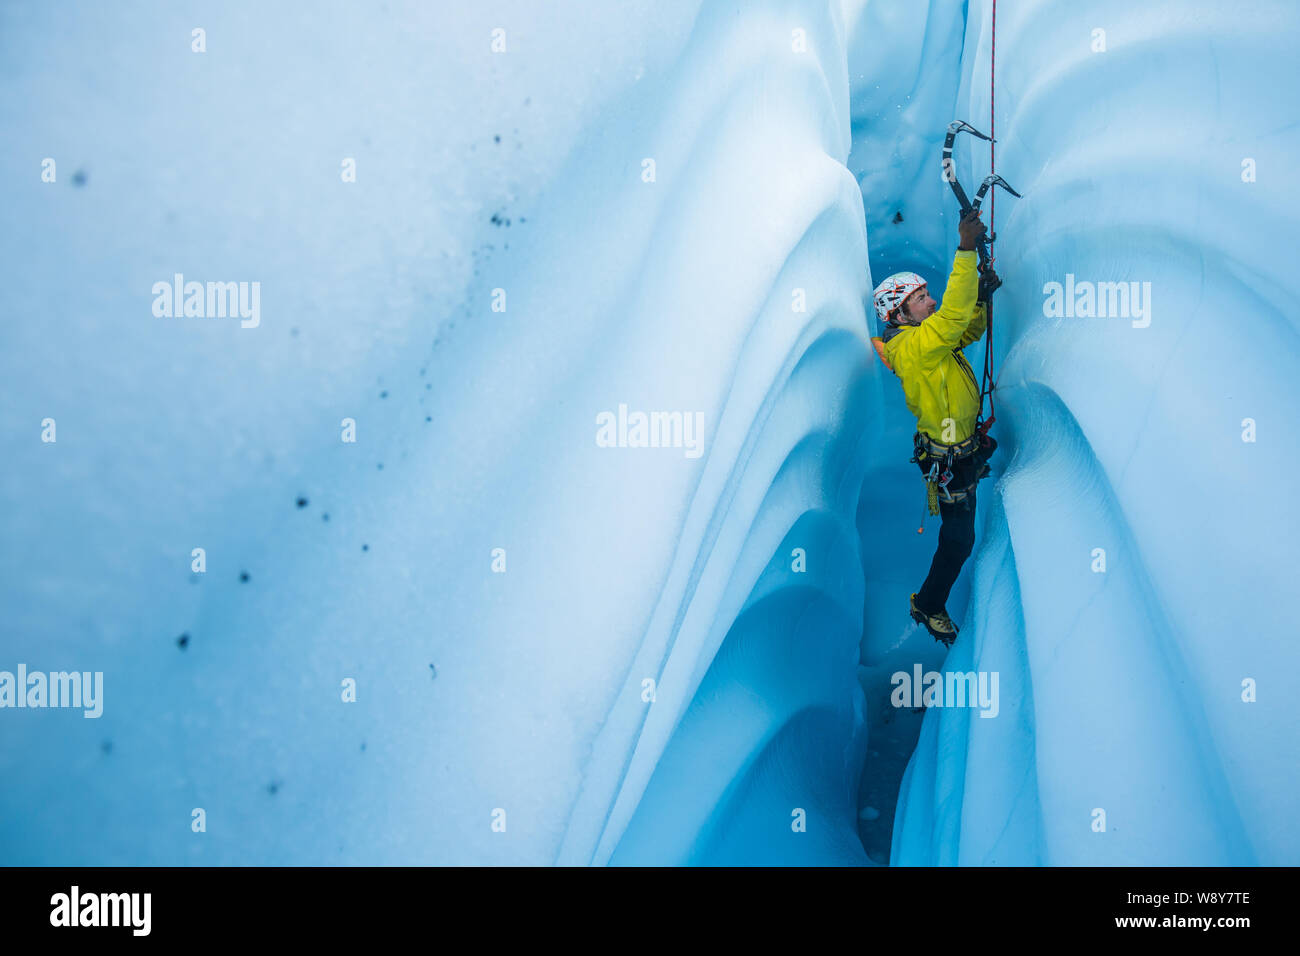 Man in yellow coat ice climbing a narrow and vertical canyon cut from solid glacier ice. Stock Photo